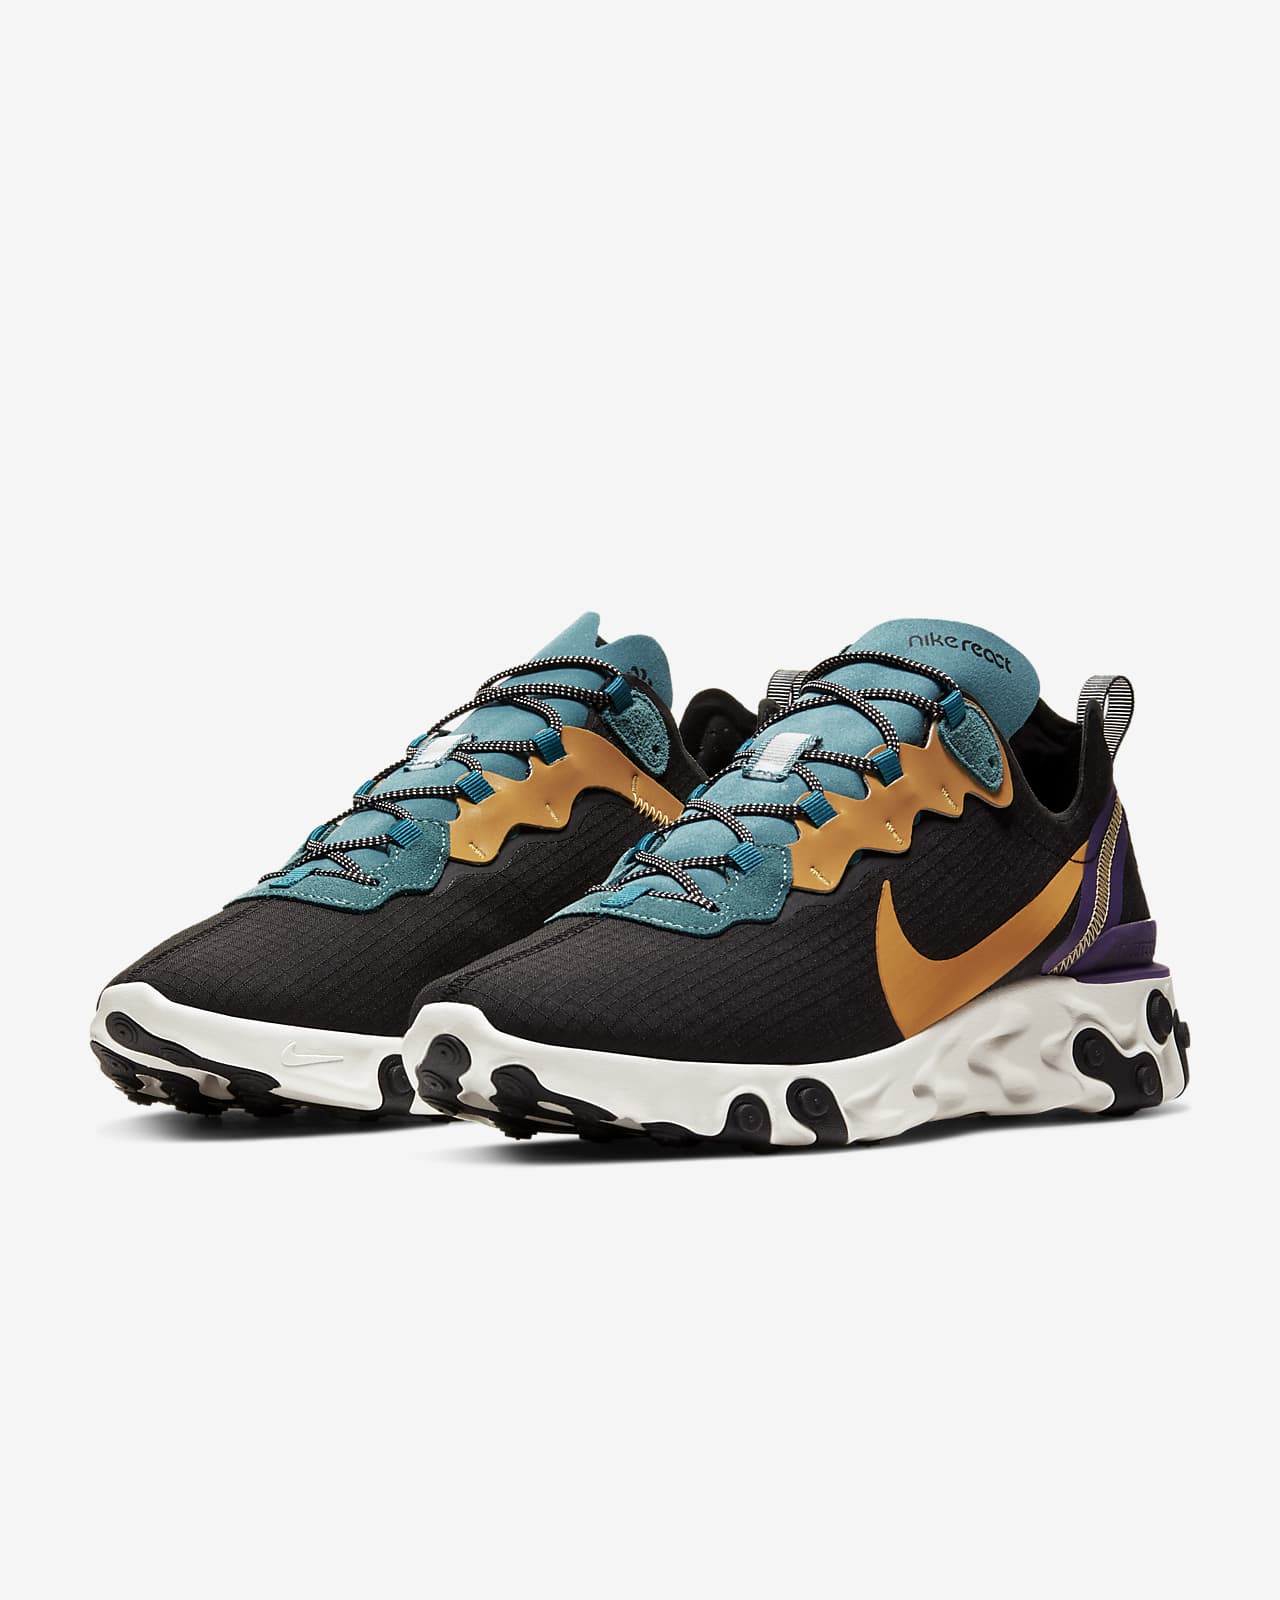 nike react element 55 trainers in black and teal